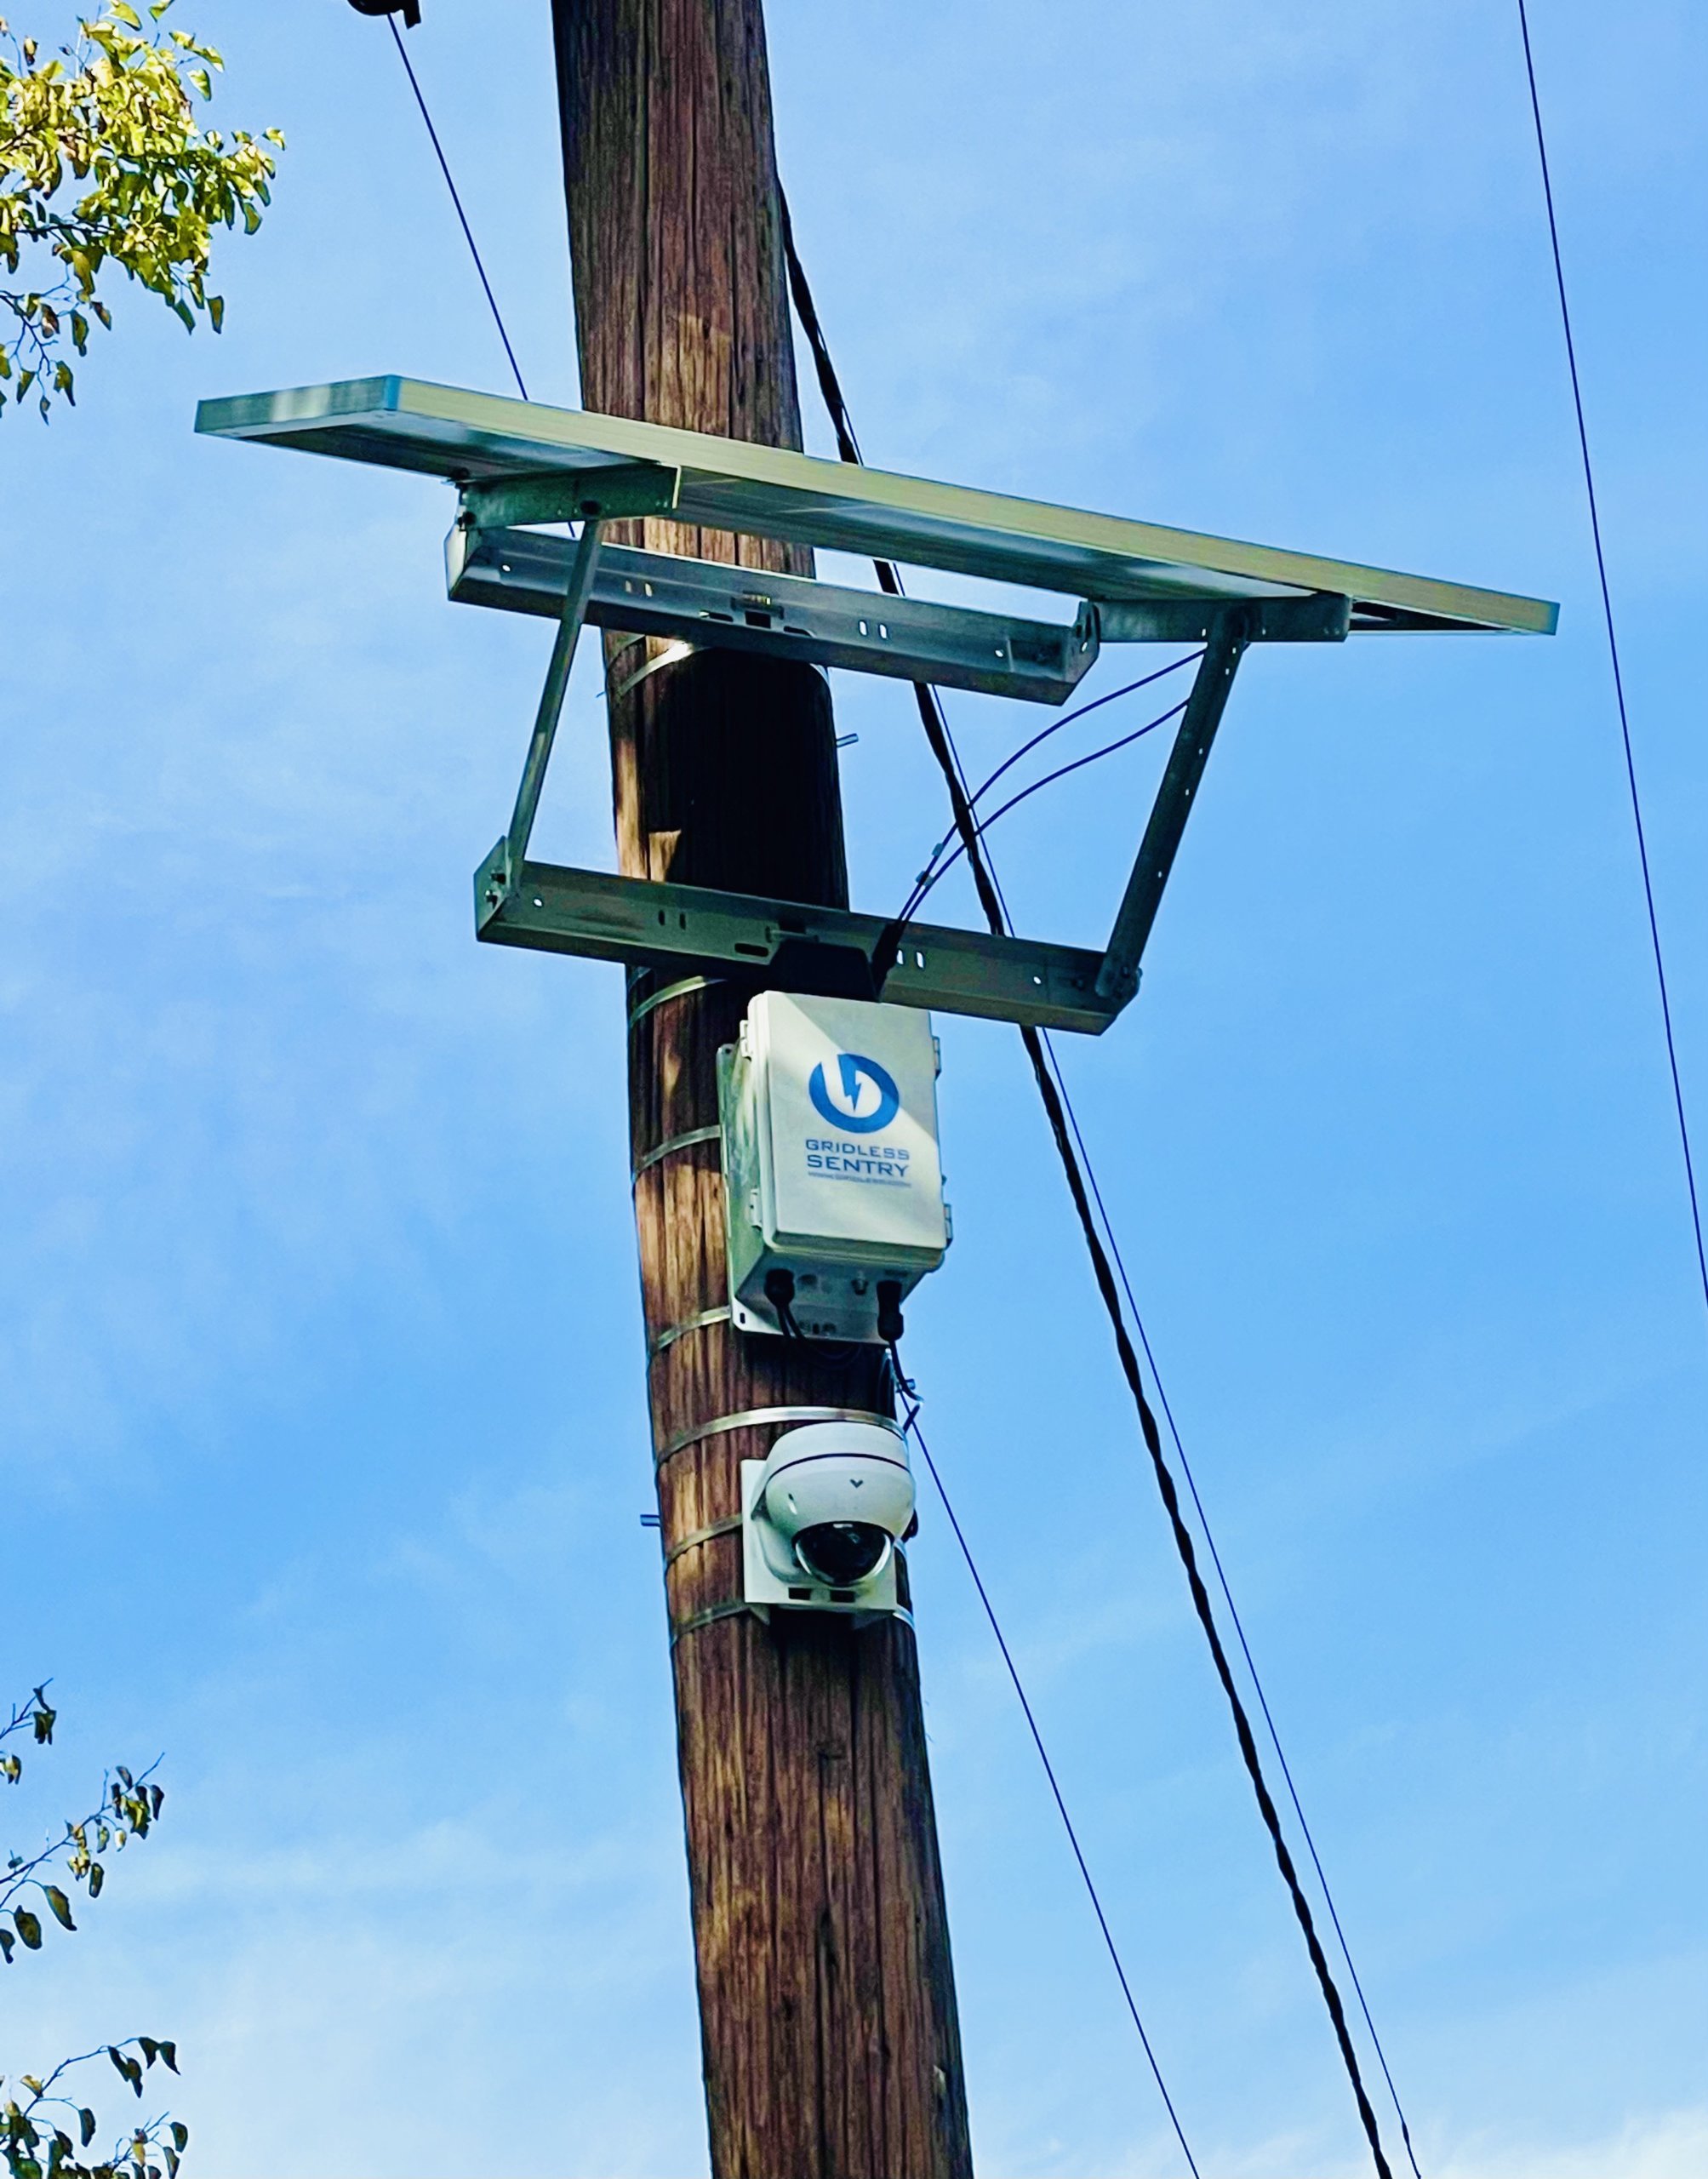 Gridless Sentry, Solar Panel, and Camera Installed on a Telephone Pole